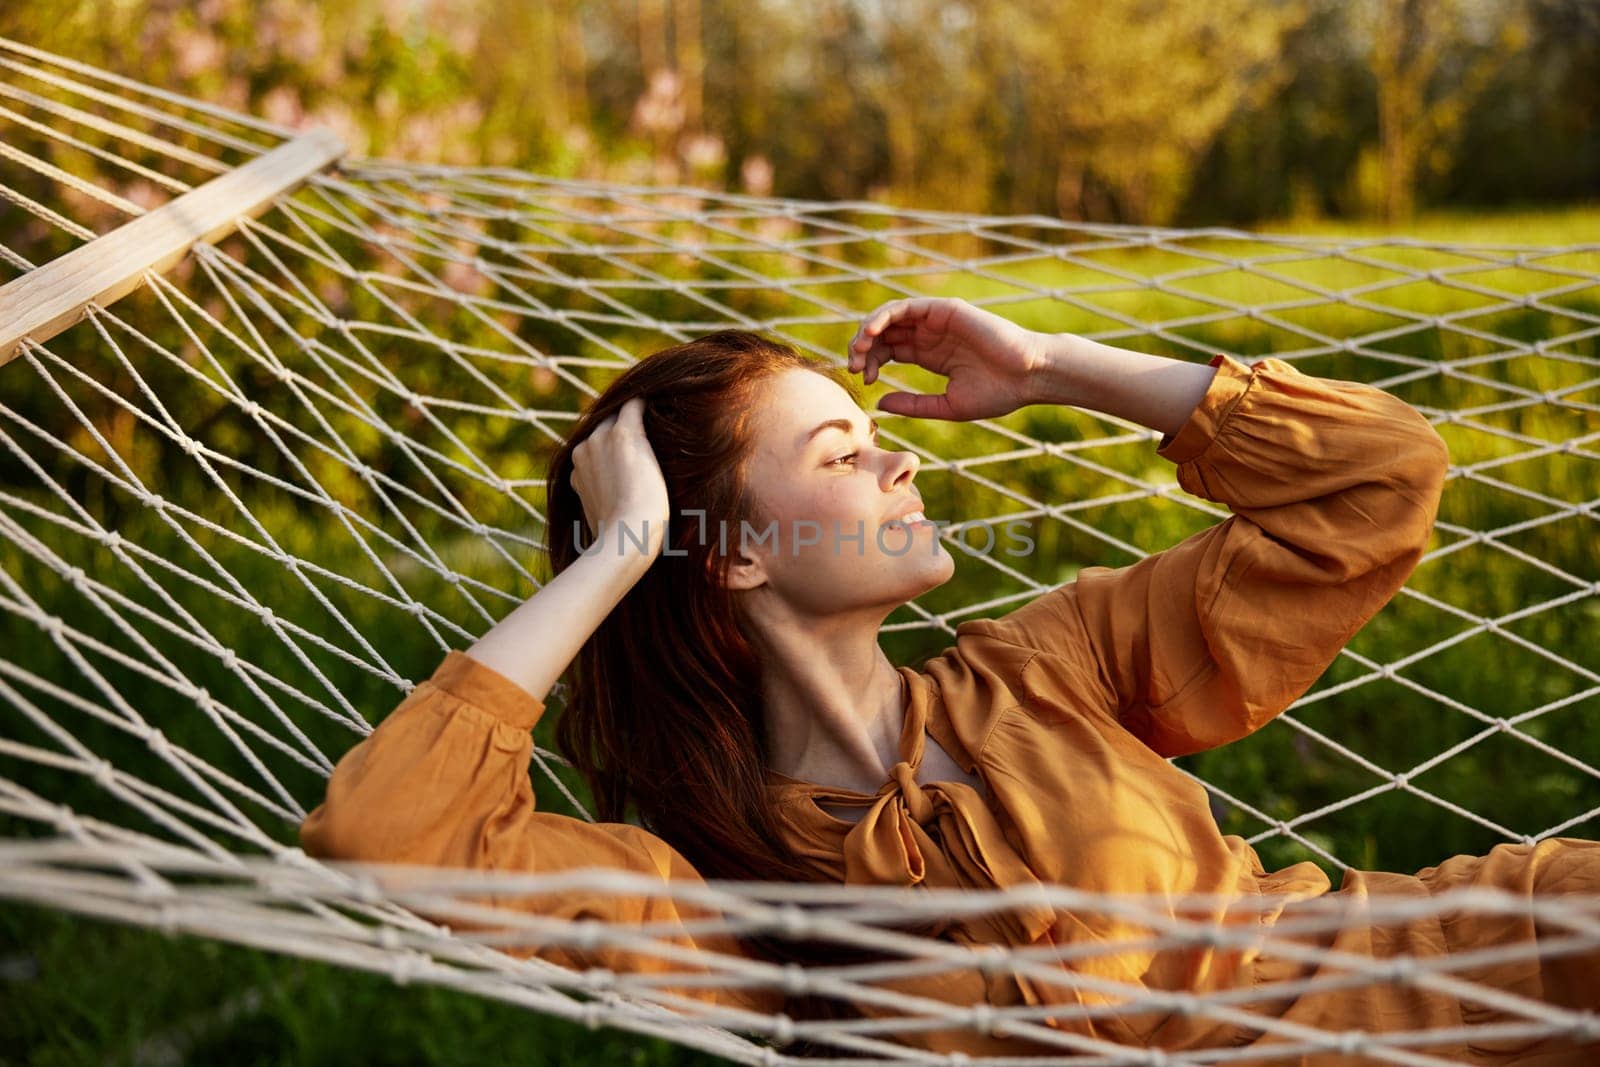 a happy woman is resting in a mesh hammock with her hands behind her head, straightening her hair, smiling happily looking away, enjoying a sunny day. High quality photo